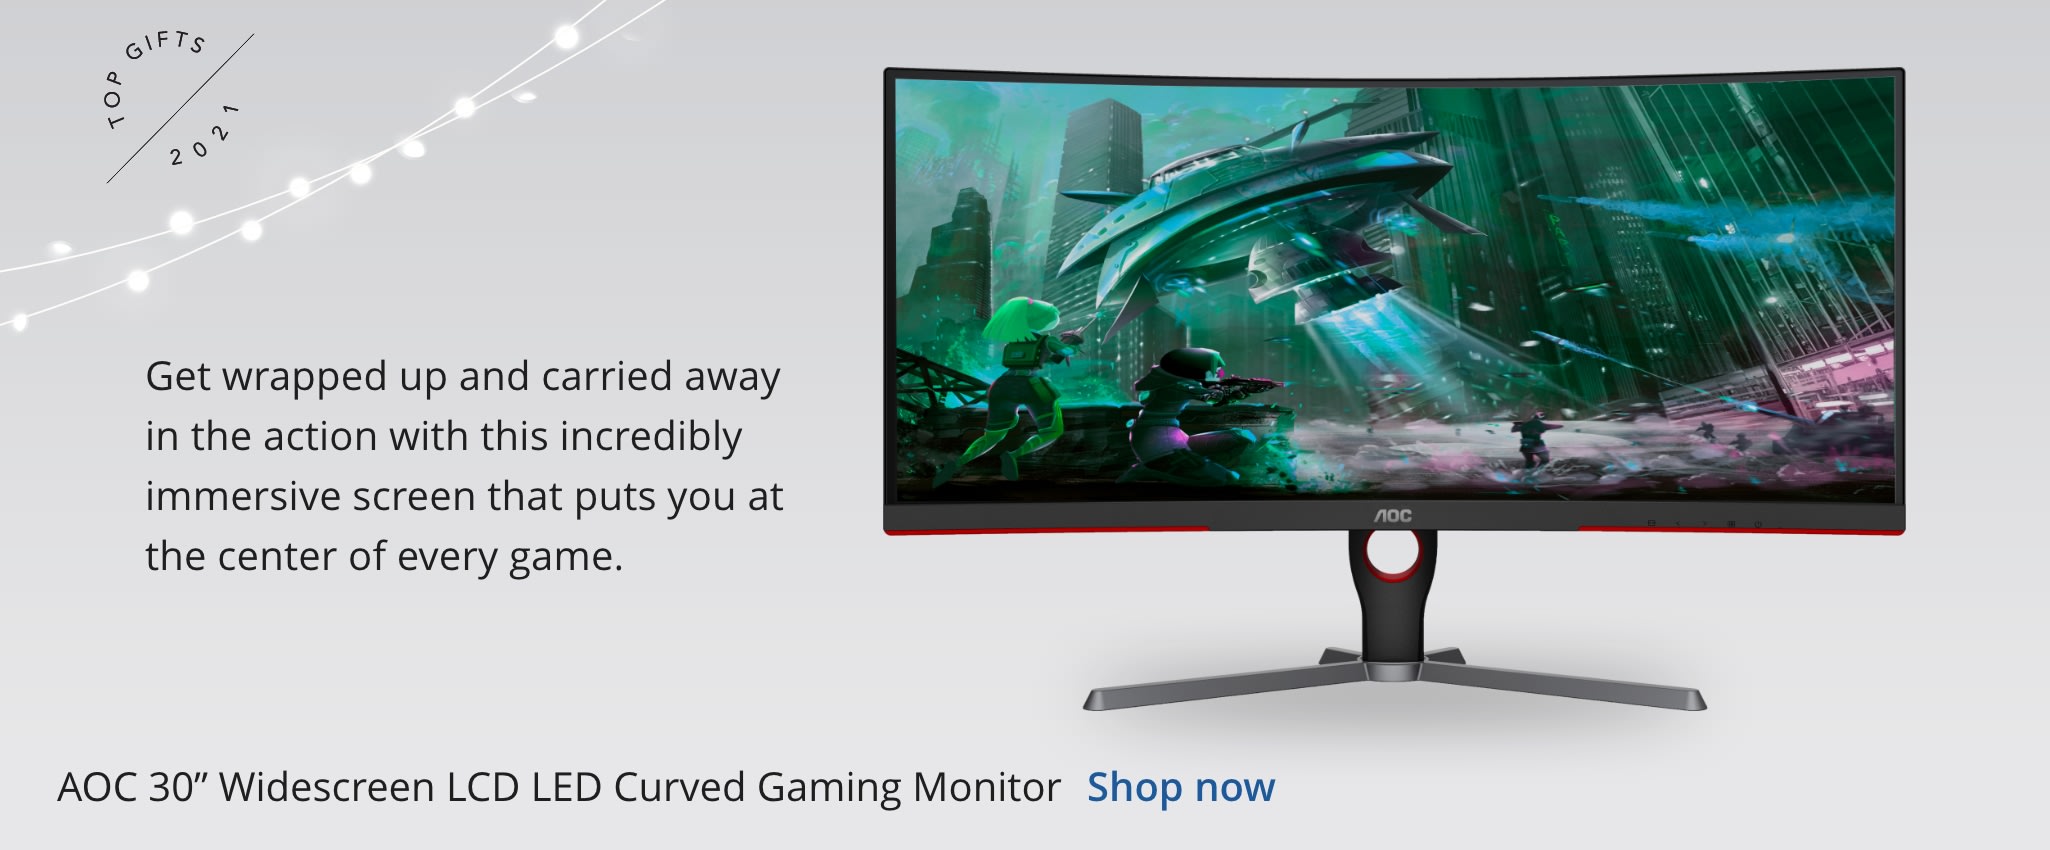 AOC 30" Widescreen LCD LED Curved Gaming Monitor